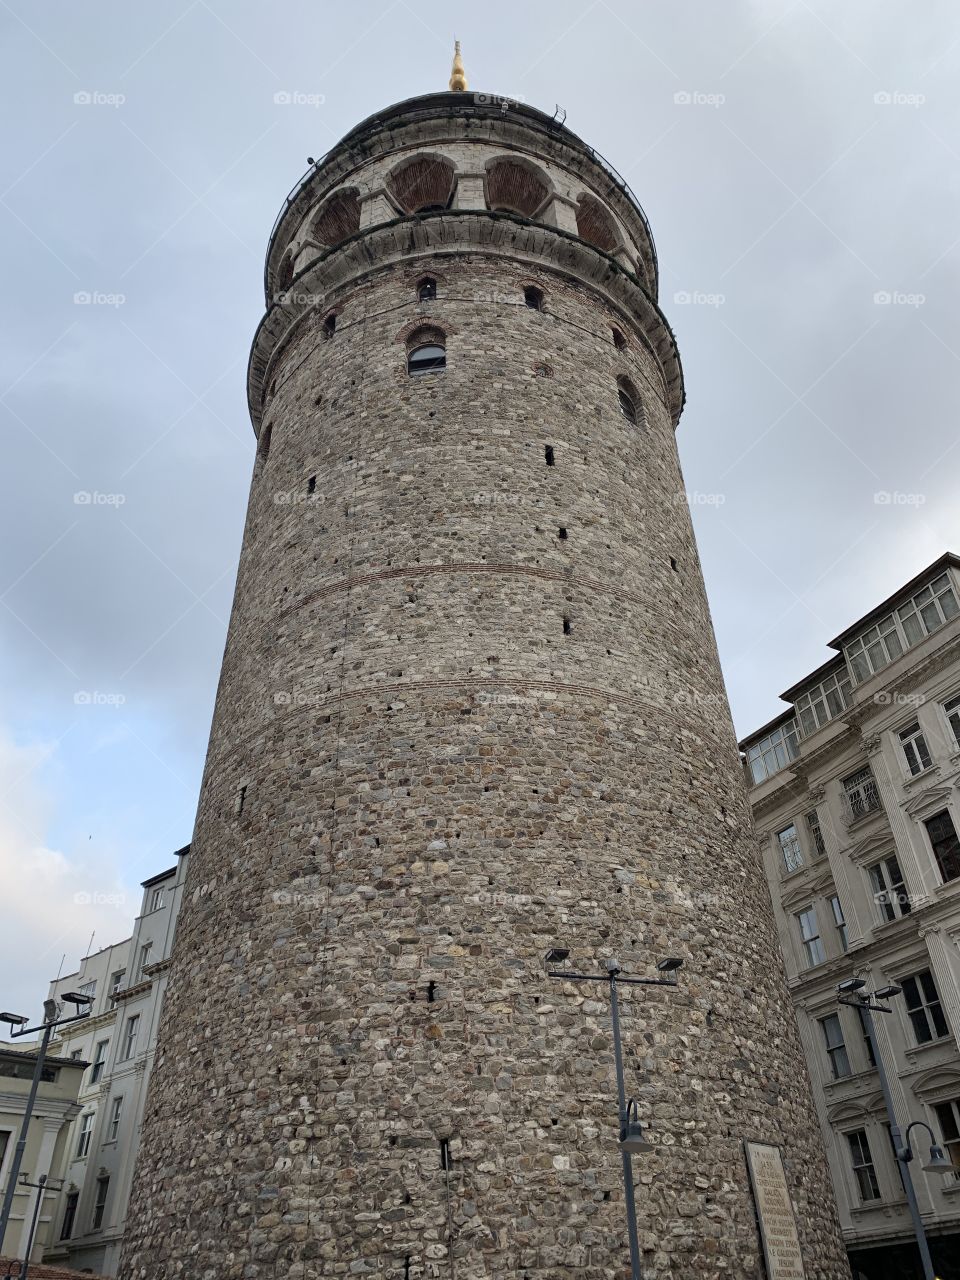 The galata tower